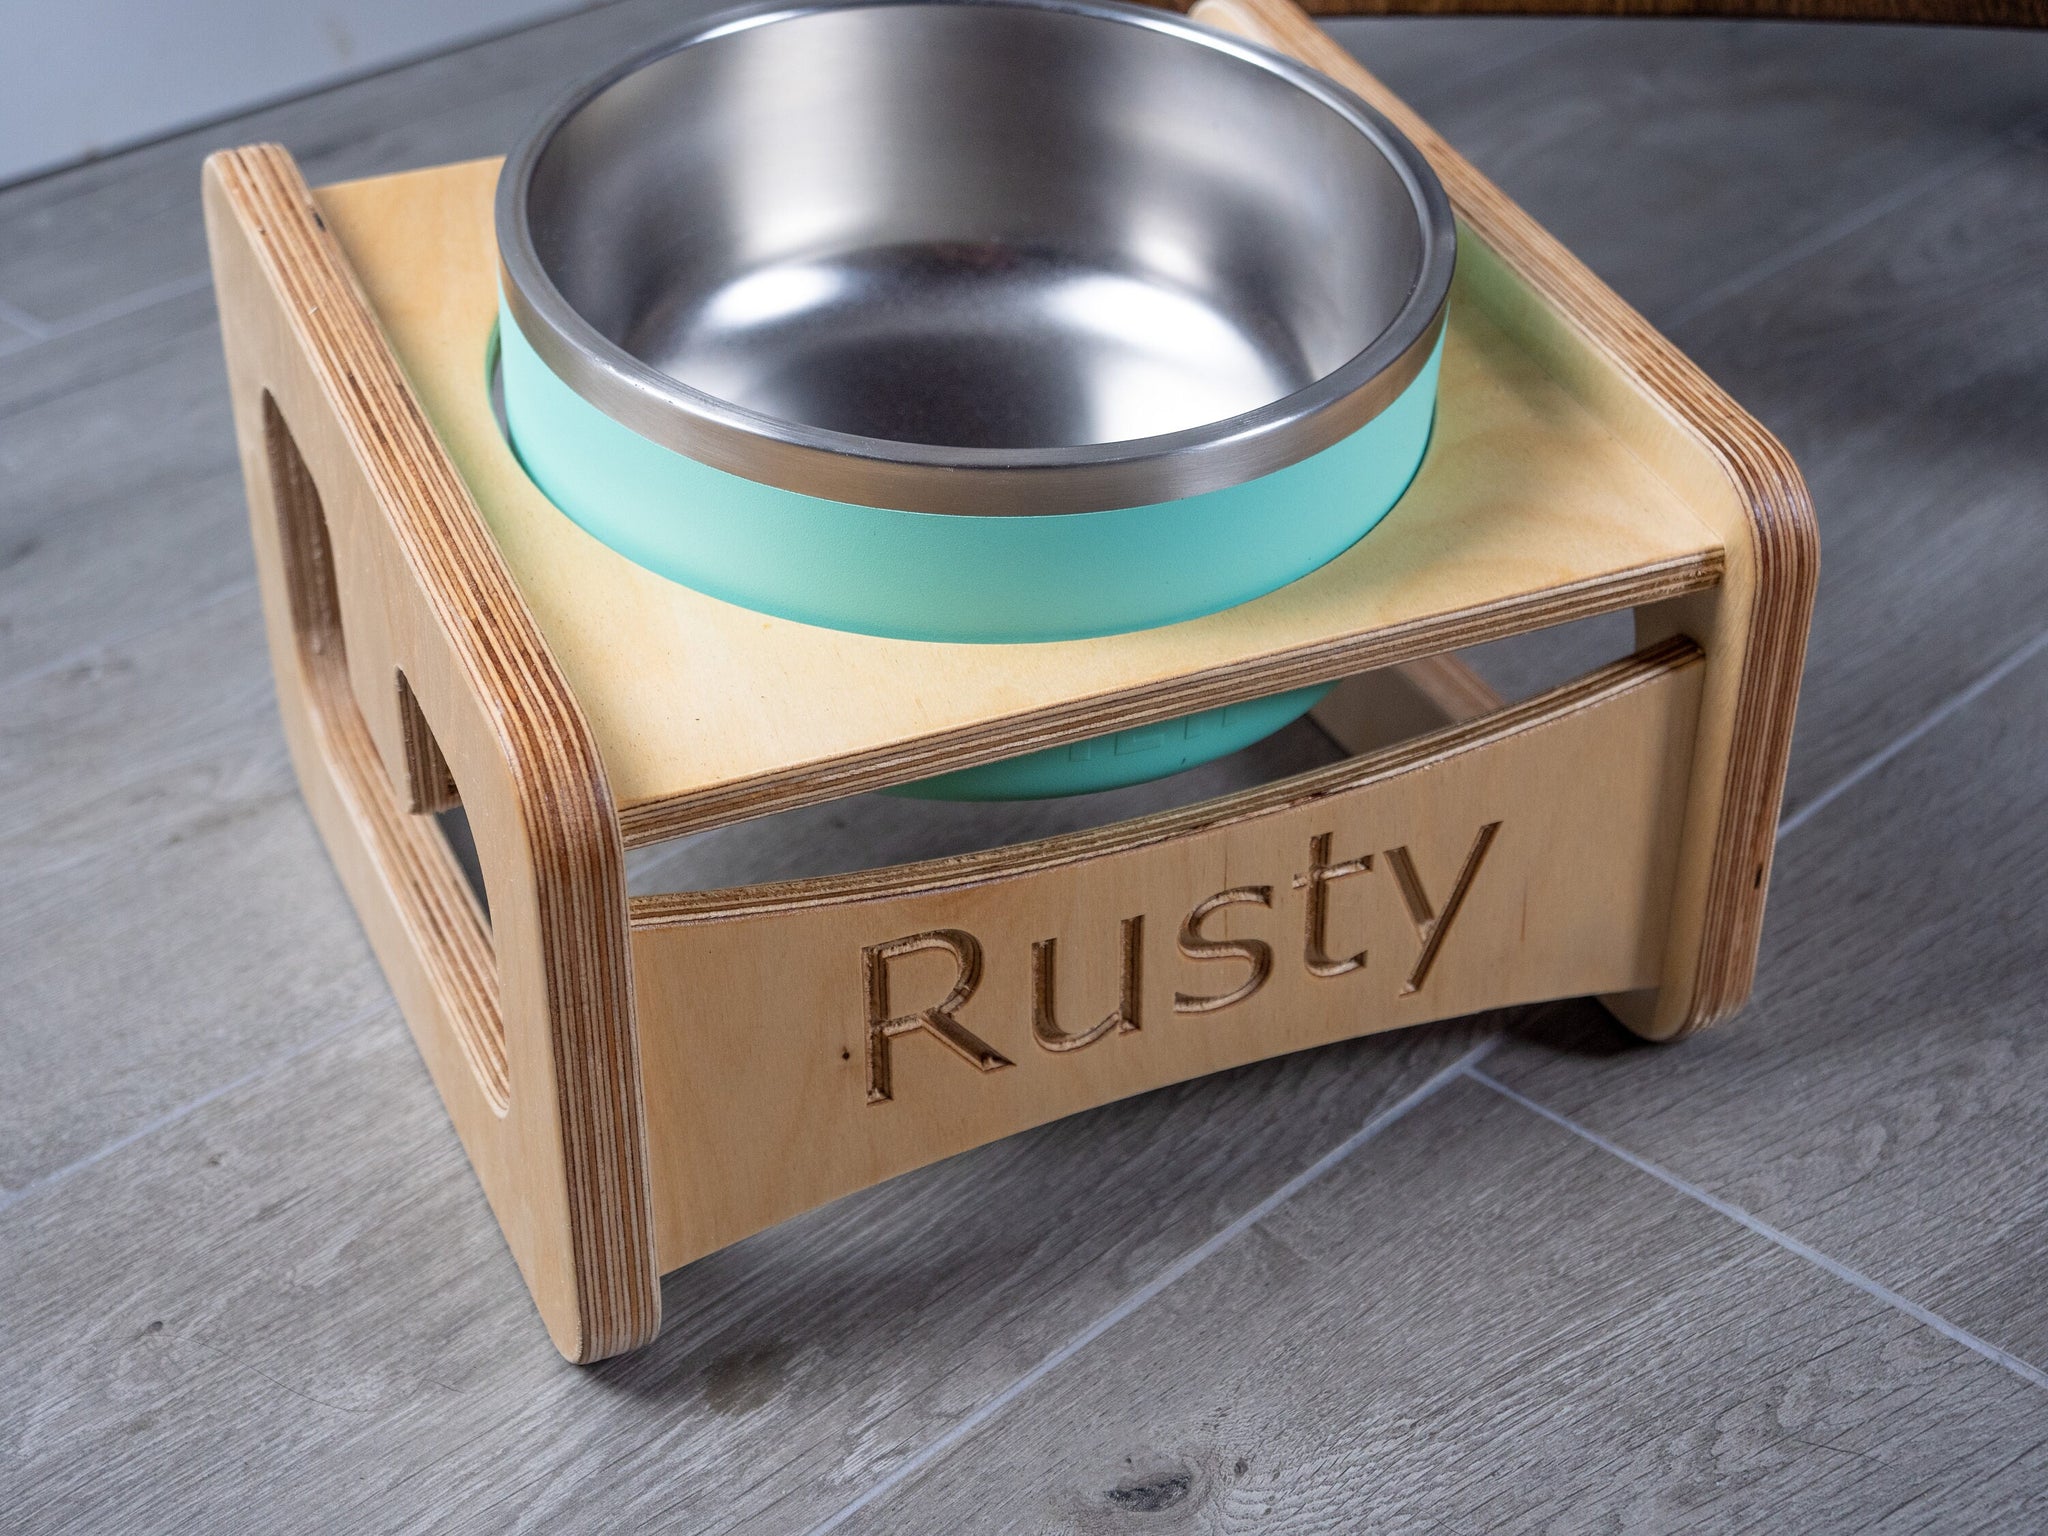 Yeti Raised Dog Bowl Stand - Bowl not included